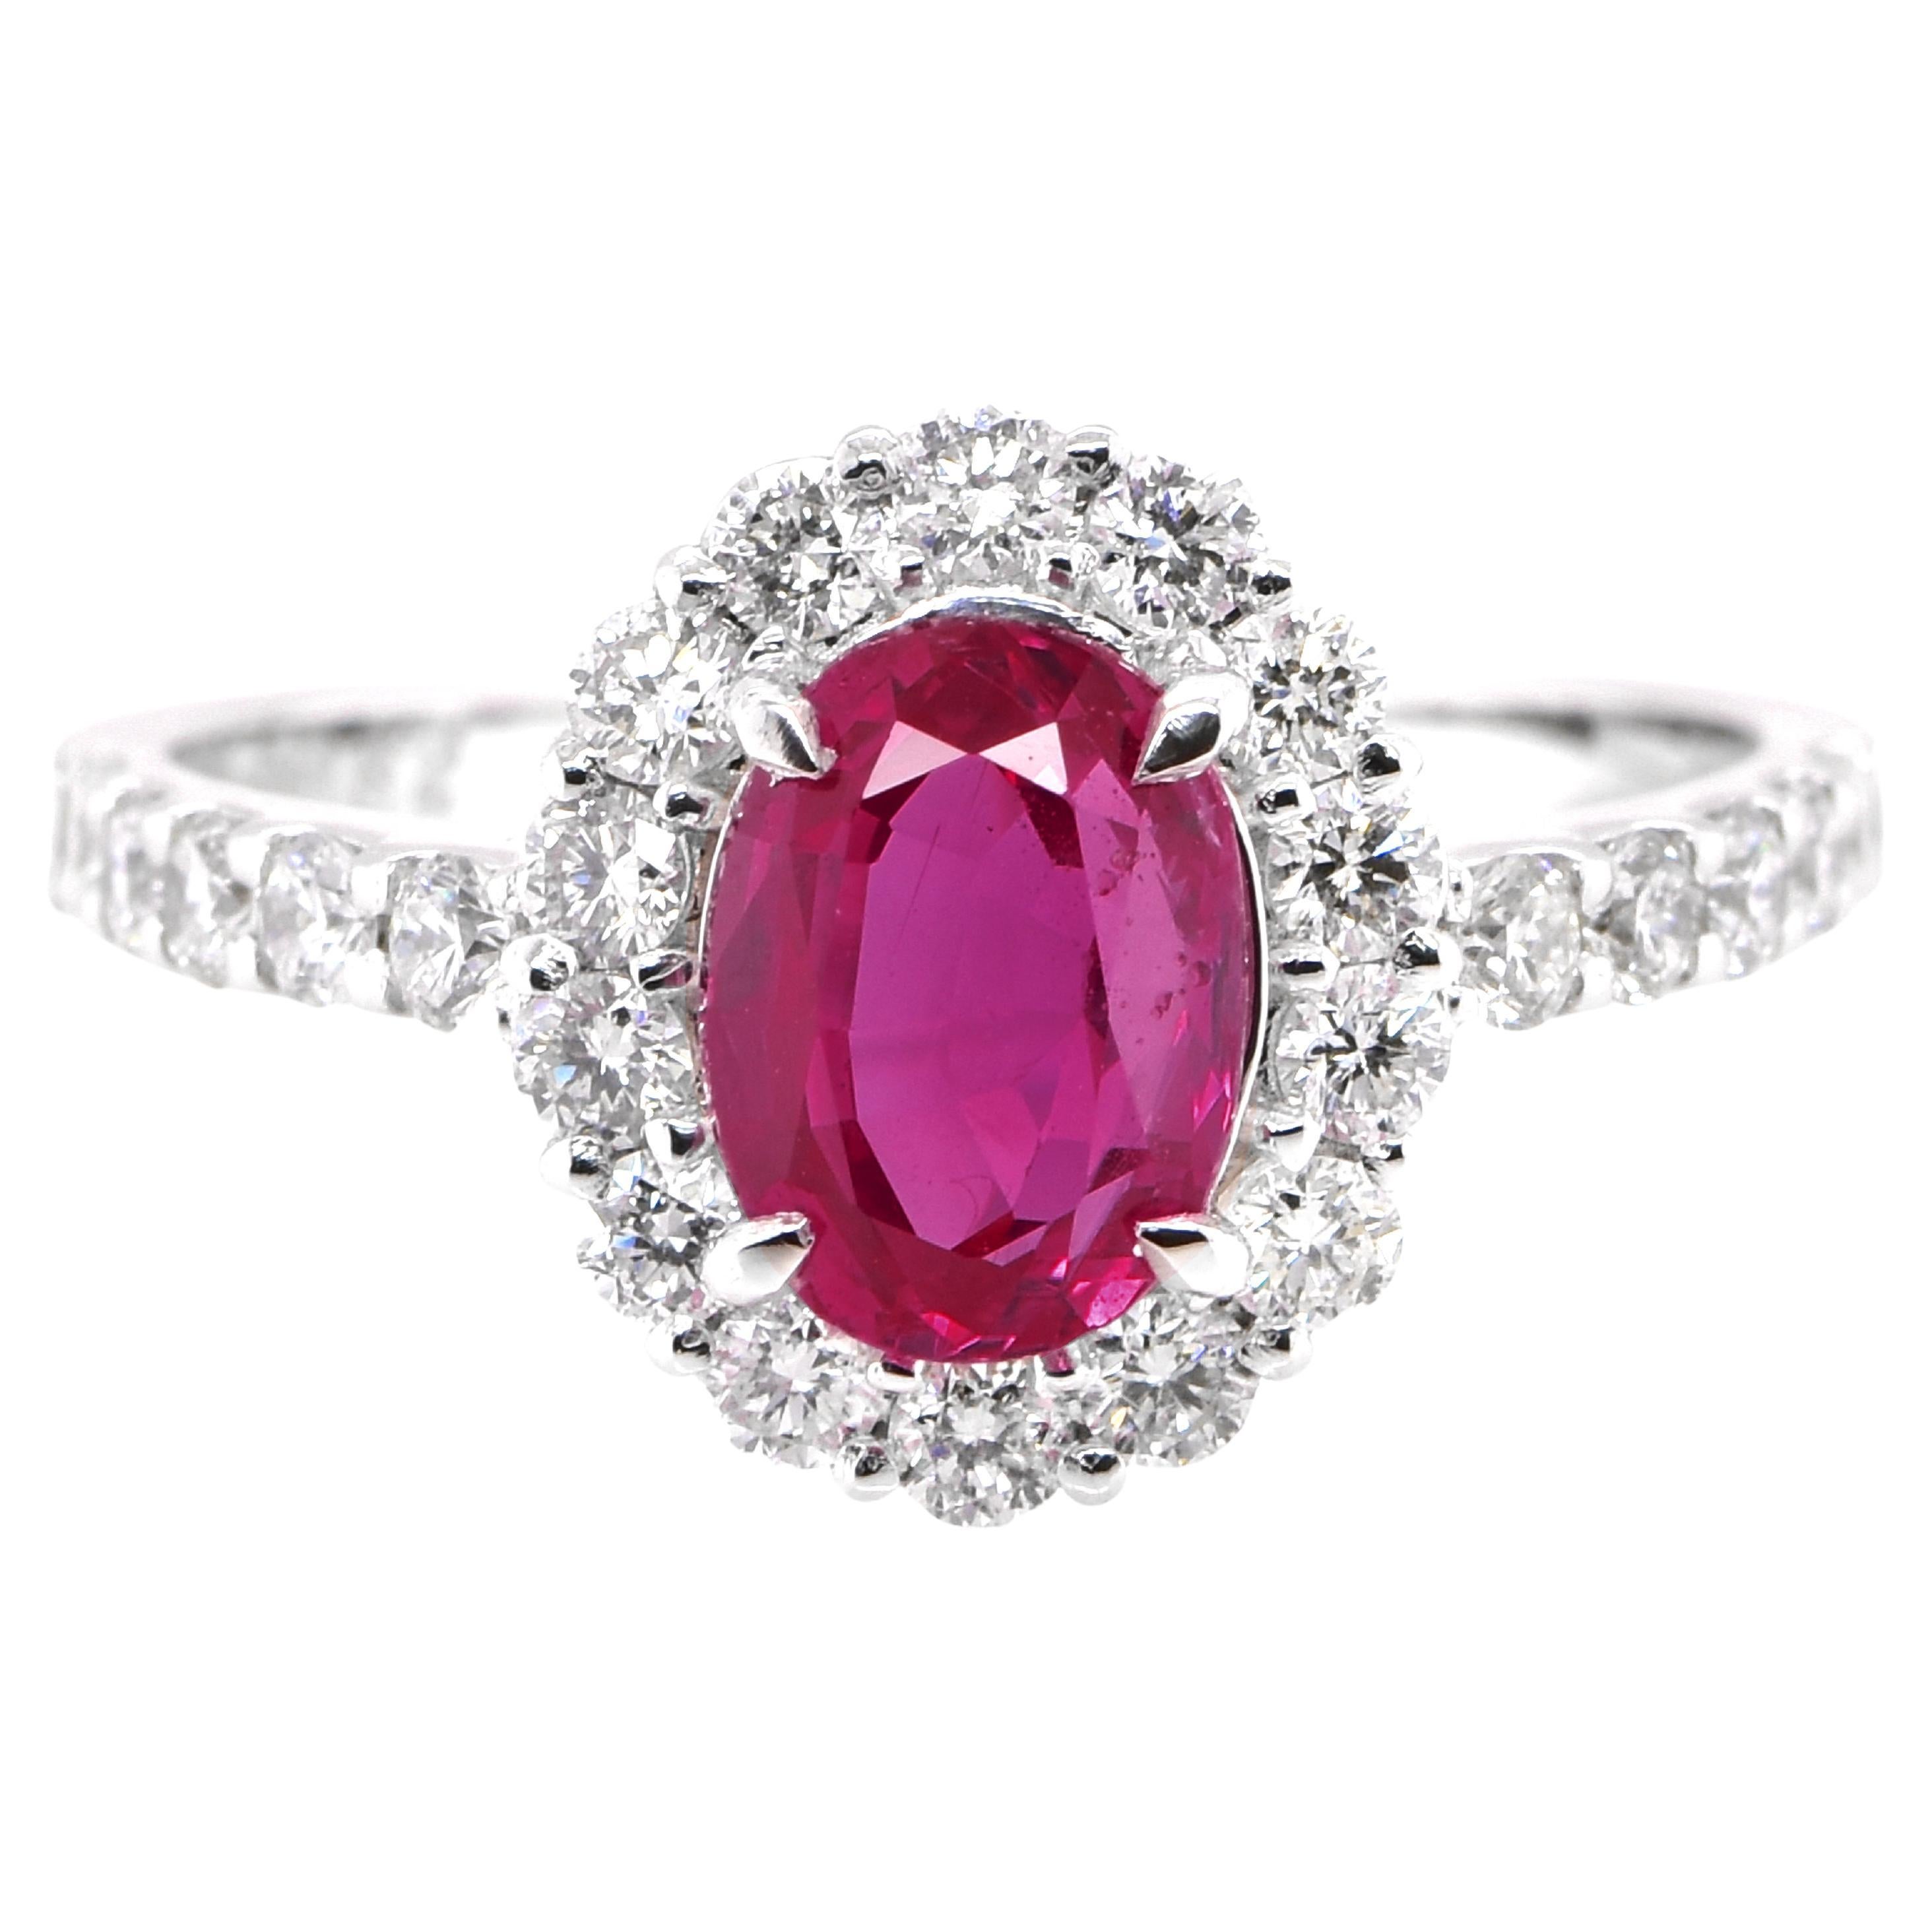 GIA Certified 1.58 Carat, Unheated, Burmese Ruby & Diamond Ring set in Platinum For Sale